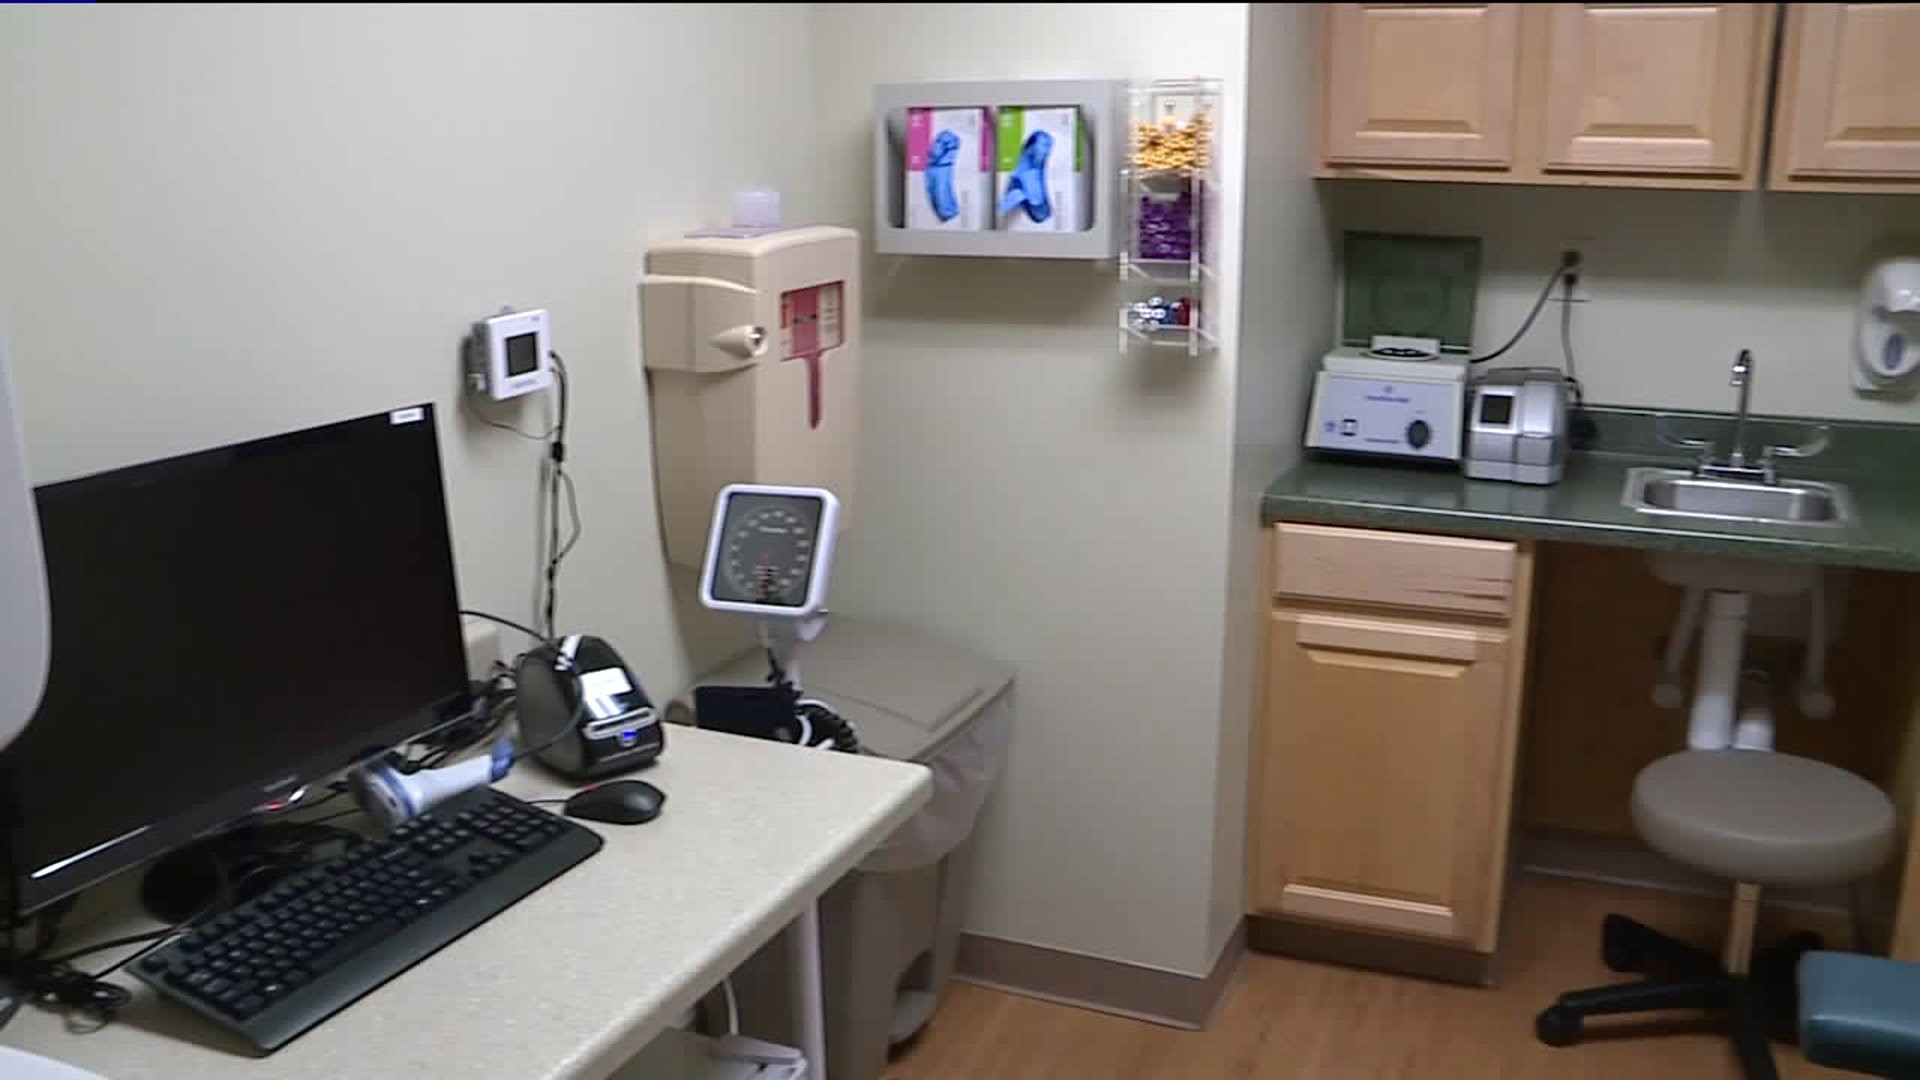 New Health Facility for Patients in Ringtown